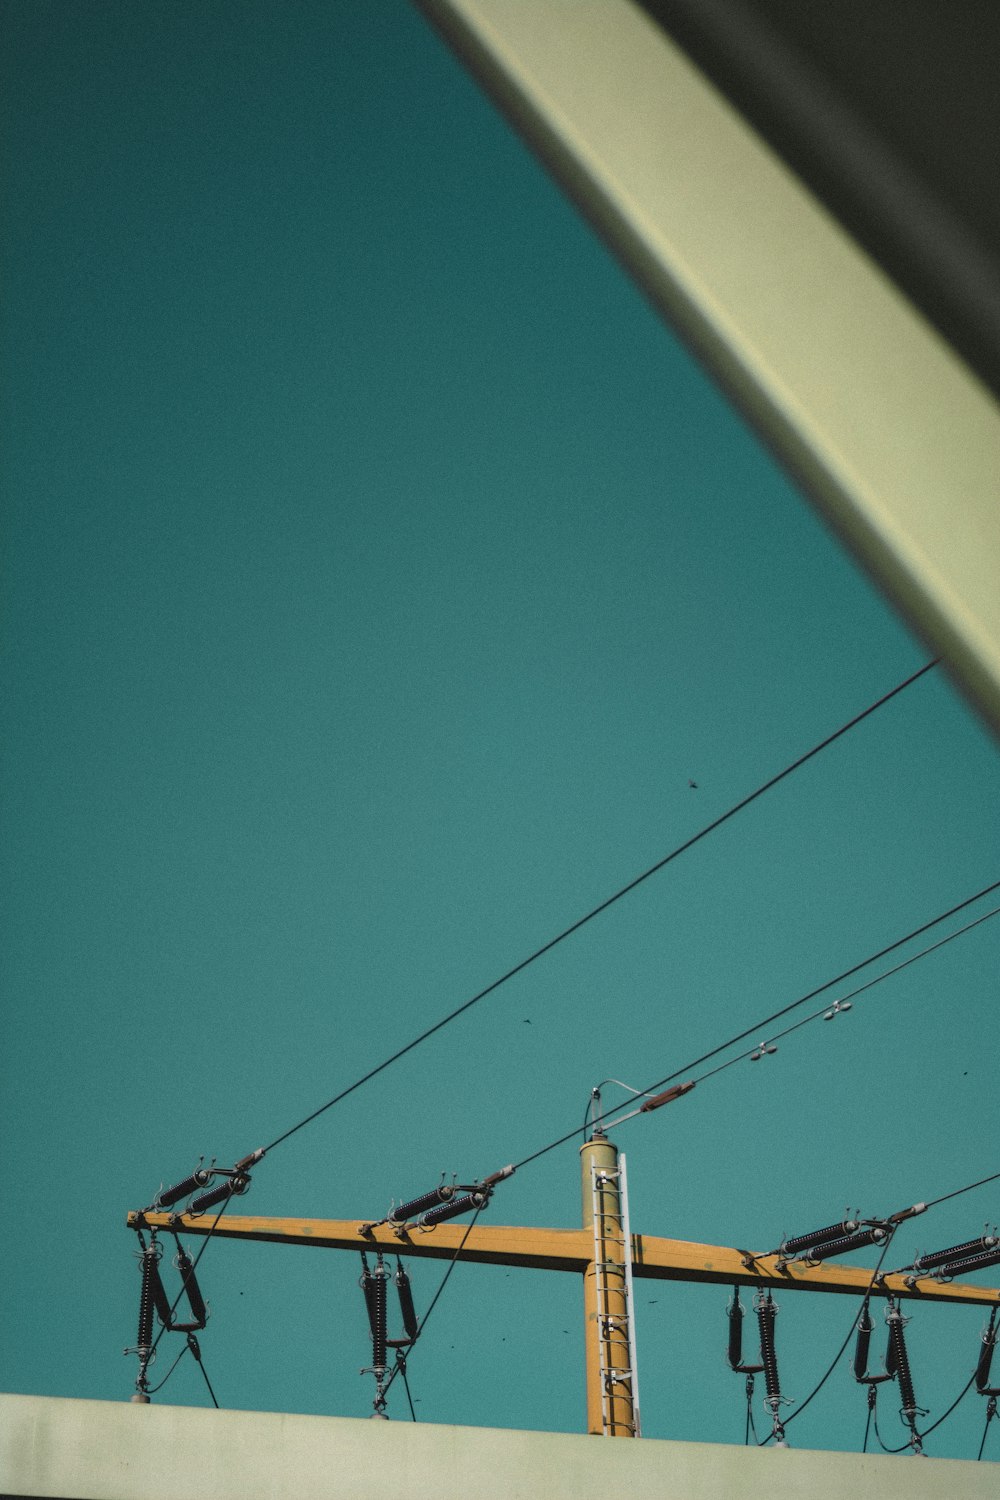 an overhead view of power lines and wires against a blue sky